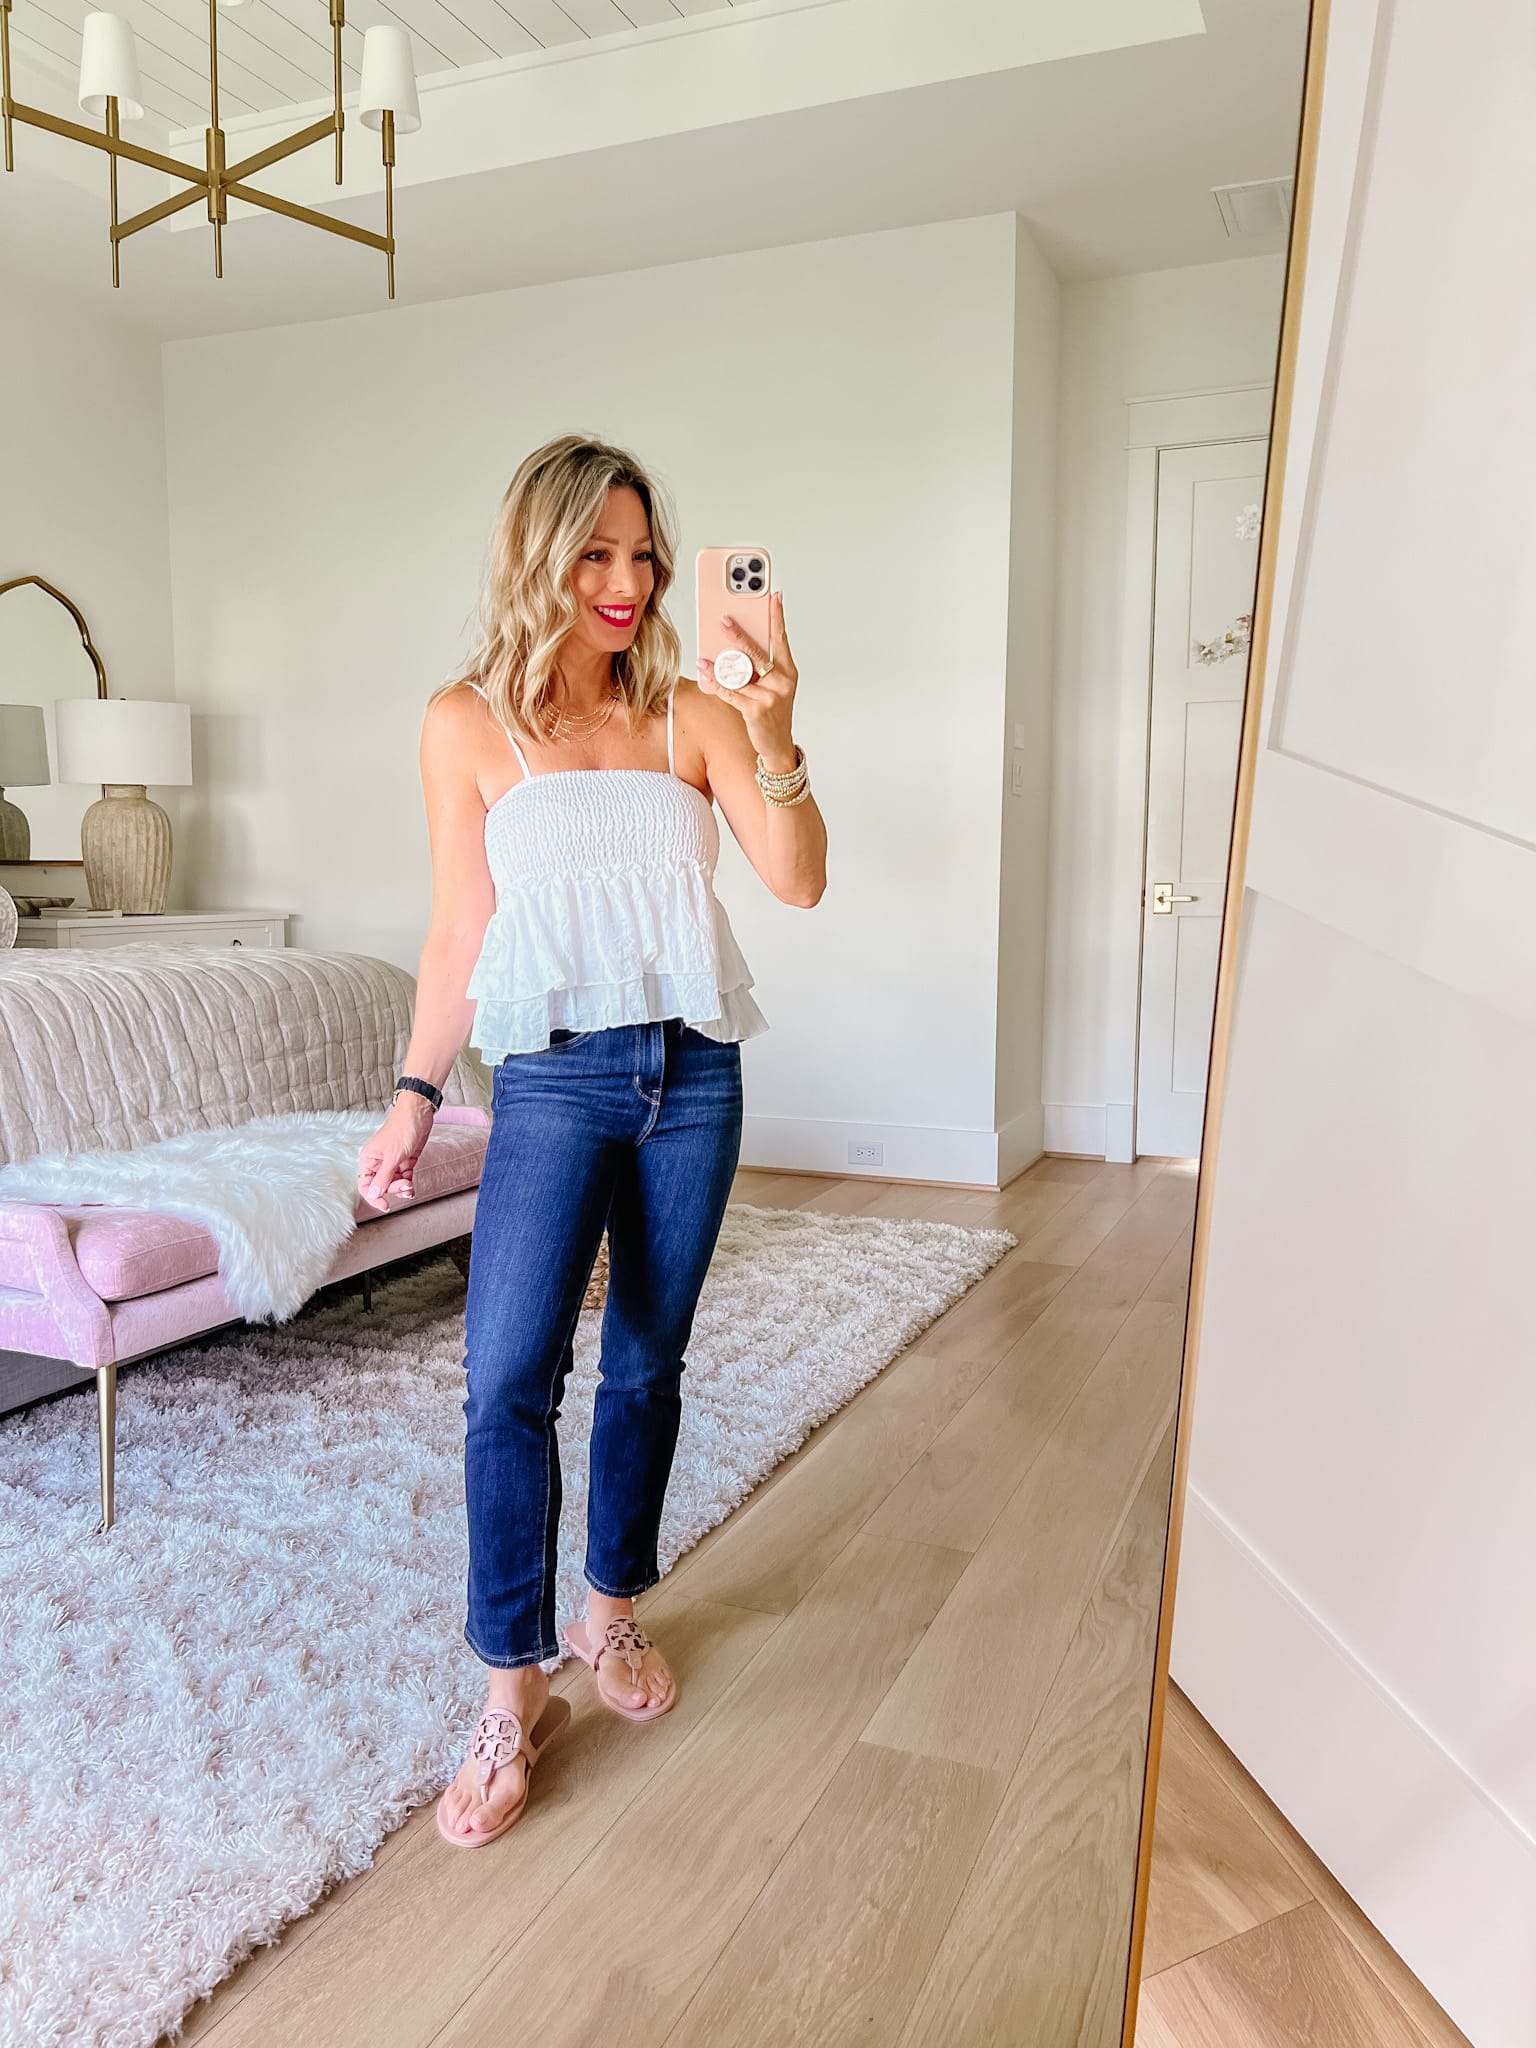 Smocked Spaghetti strap top, Jeans, Tory Burch Sandals